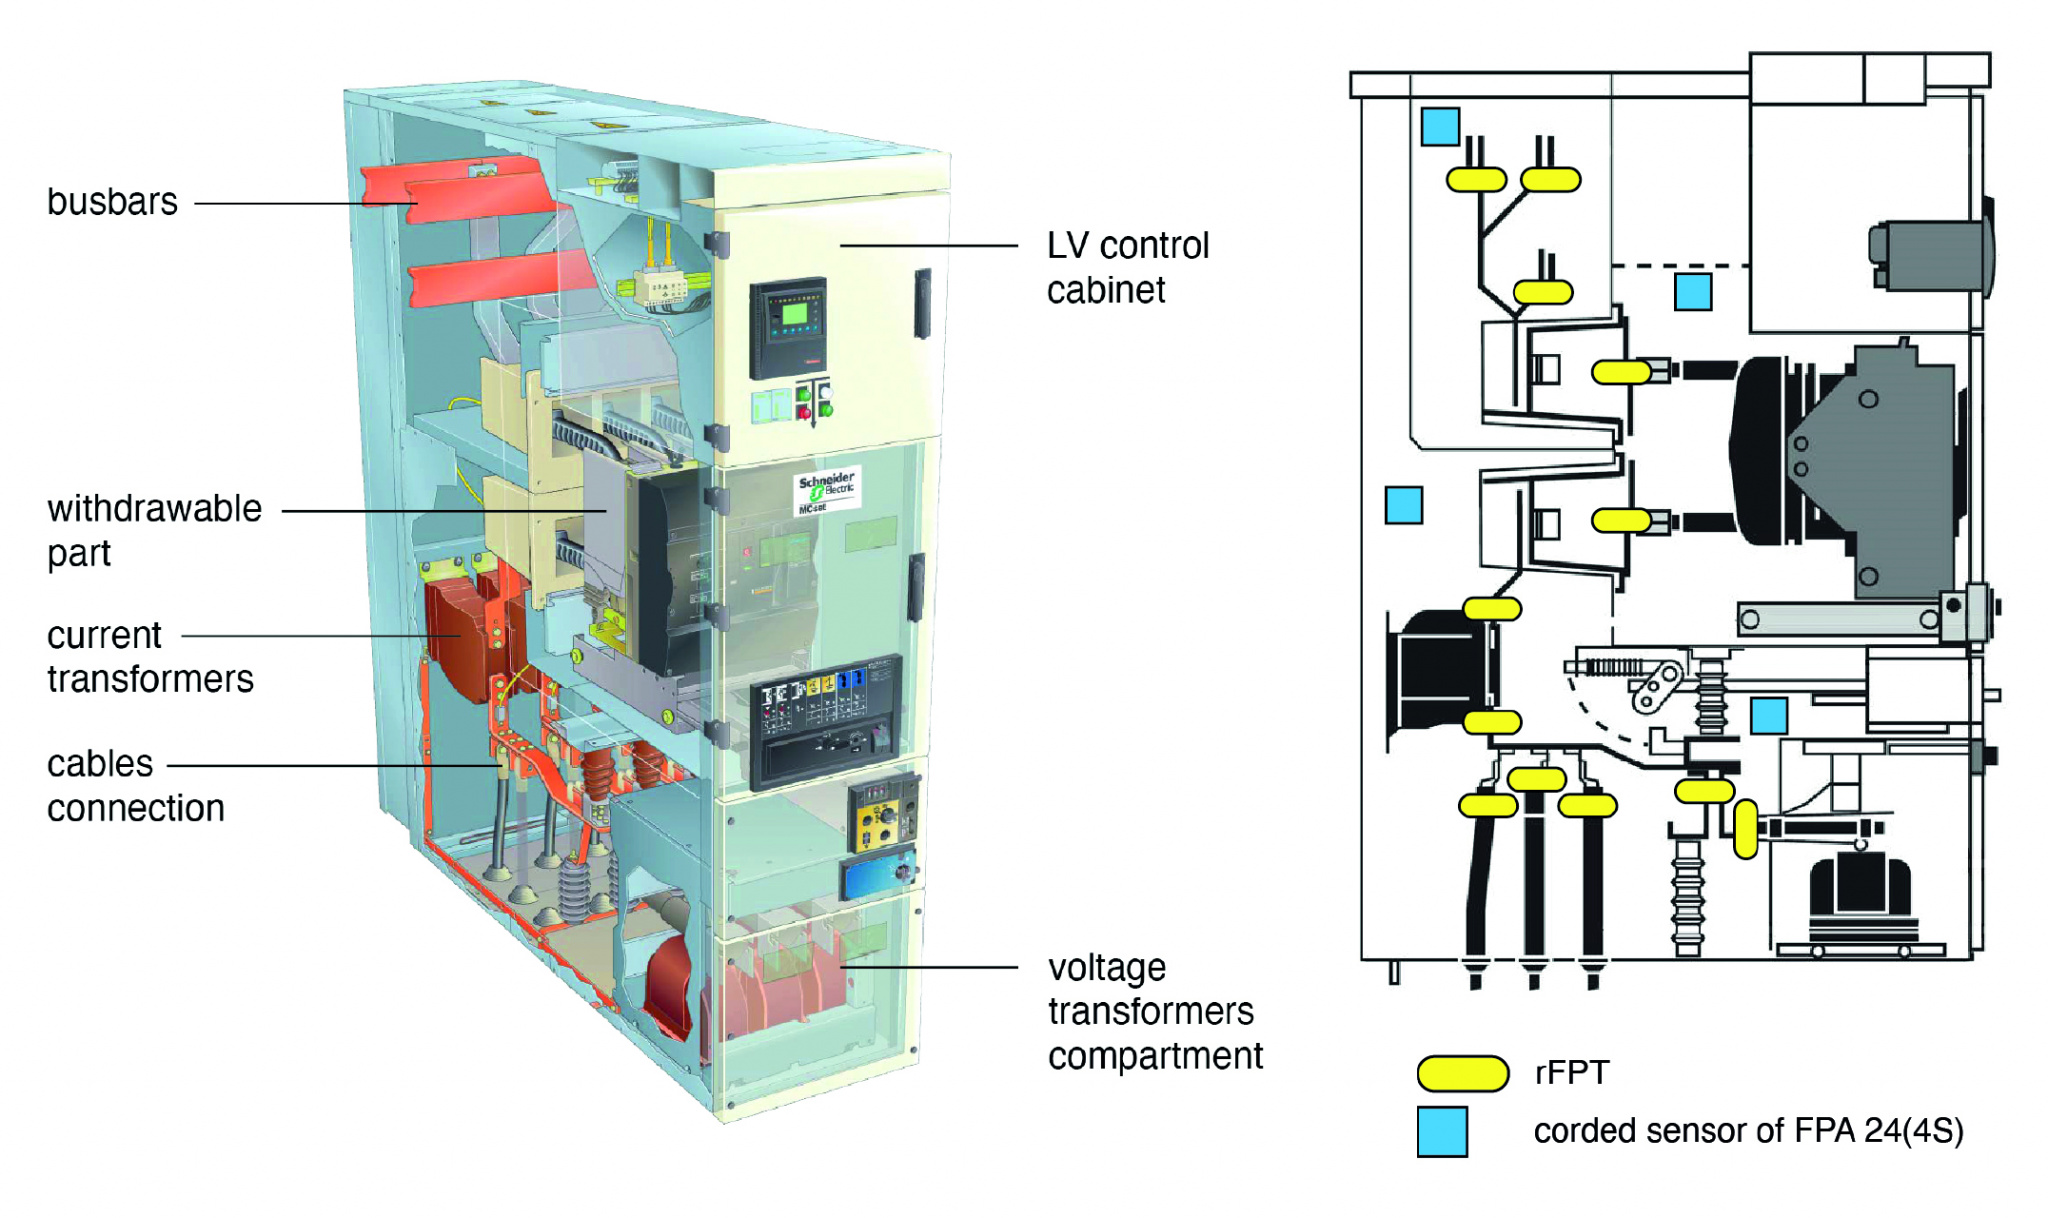 Location of temperature stickers in electrical panel: on busbars, voltage transformer, current transformer, cables connection.